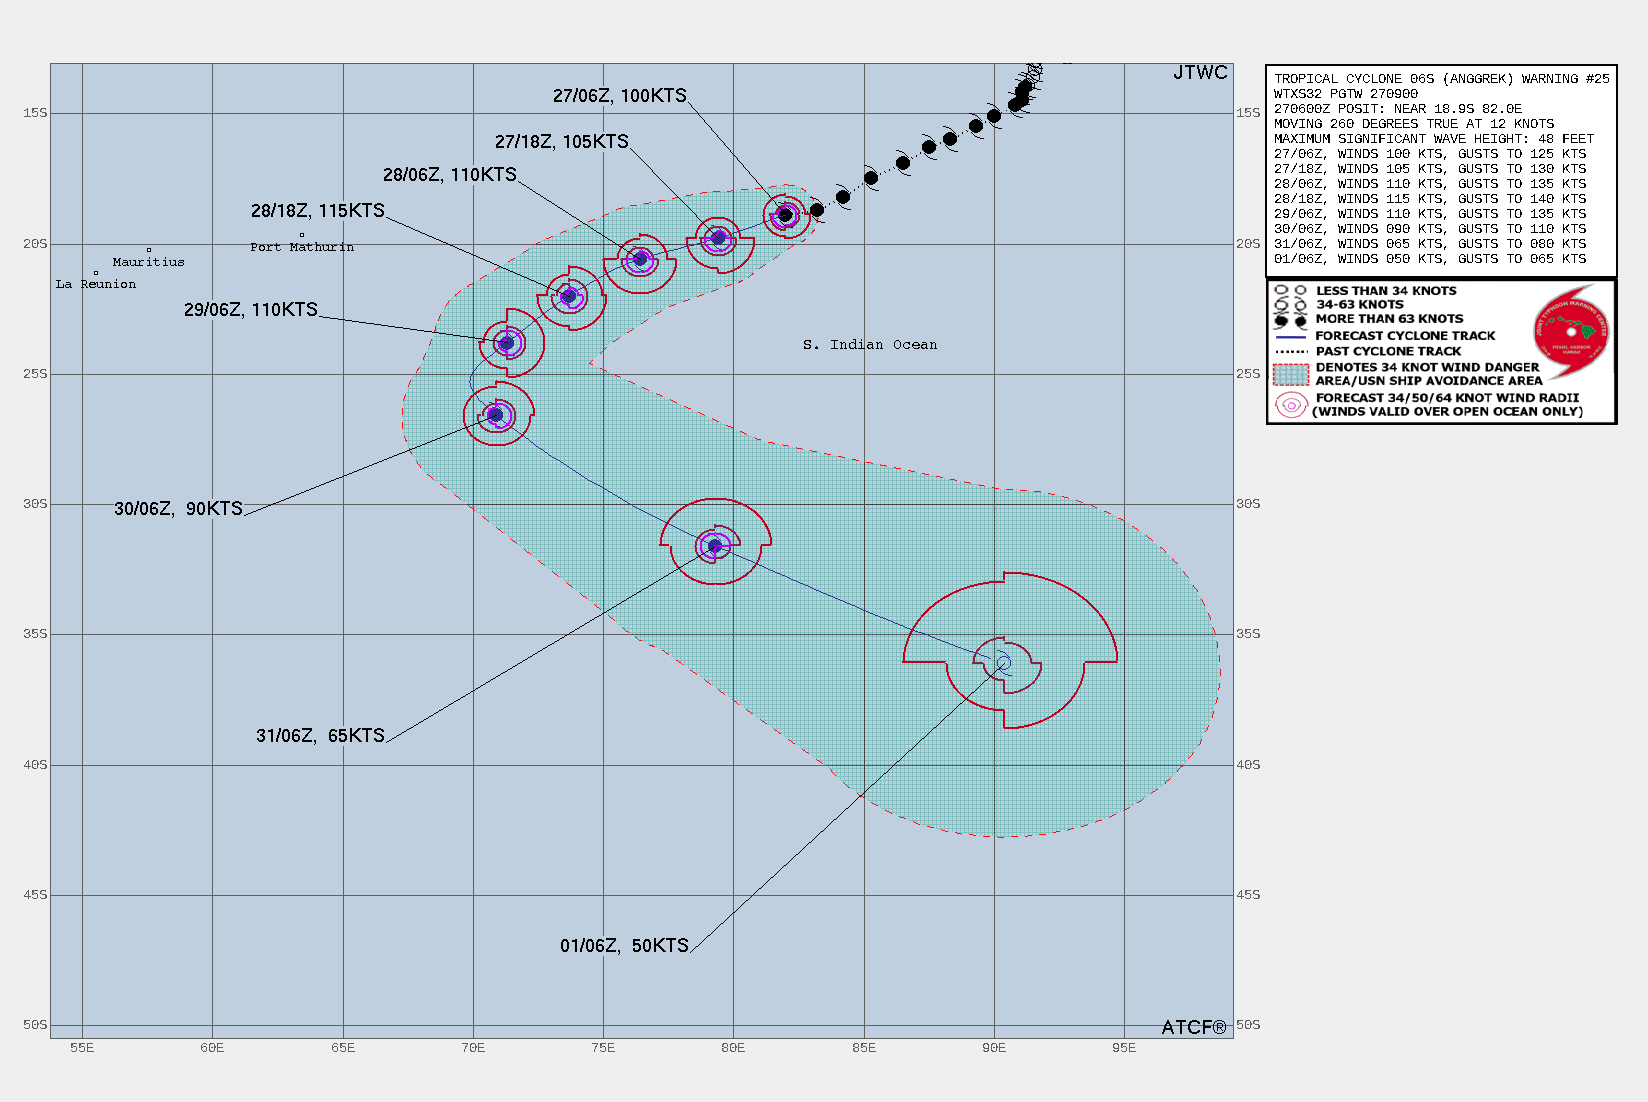 FORECAST REASONING.  SIGNIFICANT FORECAST CHANGES: THERE ARE NO SIGNIFICANT CHANGES TO THE FORECAST FROM THE PREVIOUS WARNING.  FORECAST DISCUSSION: TC ANGGREK WILL CONTINUE ON A WEST-SOUTHWESTWARD TO SOUTHWESTWARD TRACK UNDER THE STEERING INFLUENCE OF THE STR. AFTER TAU 48, IT WILL TURN MORE POLEWARD AS IT ROUNDS THE STR AXIS, RECURVE AND ACCELERATE SOUTHEASTWARD AS THE STR RECEDES IN RESPONSE TO AN APPROACHING MID-LATITUDE TROUGH FROM THE SOUTHWEST. THE HIGHLY FAVORABLE ENVIRONMENT WILL FUEL A STEADY INTENSIFICATION TO A PEAK OF 110KTS BY TAU 48, AFTERWARD, INCREASING VWS ASSOCIATED WITH THE STRONG WESTERLIES, THEN COOLING SST WILL GRADUALLY ERODE THE SYSTEM. CONCURRENTLY, BY TAU 96, TC 08S WILL ENTER THE BAROCLINIC ZONE AND BEGIN EXTRA-TROPICAL TRANSITION (ETT), AND BY TAU 120, WILL TRANSFORM INTO A STORM-FORCE COLD CORE LOW.